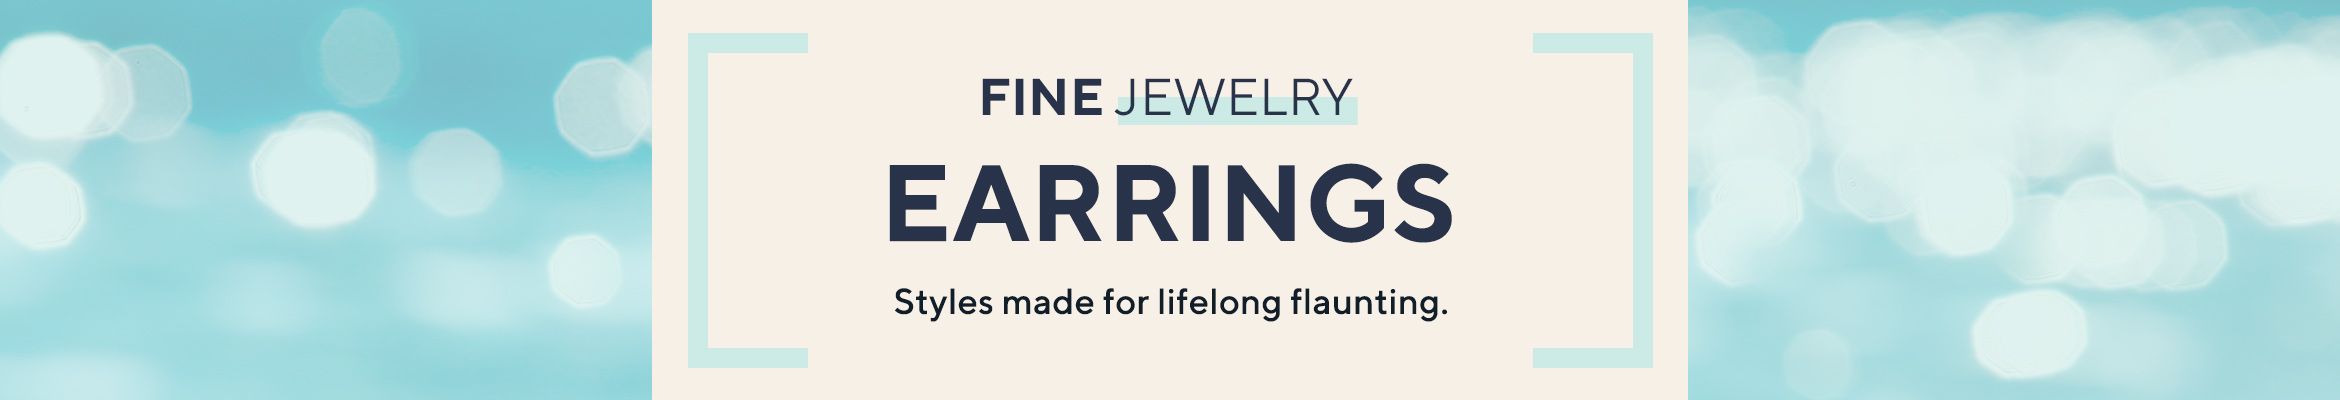 Fine Jewelry - Earrings - Styles made for lifelong flaunting.